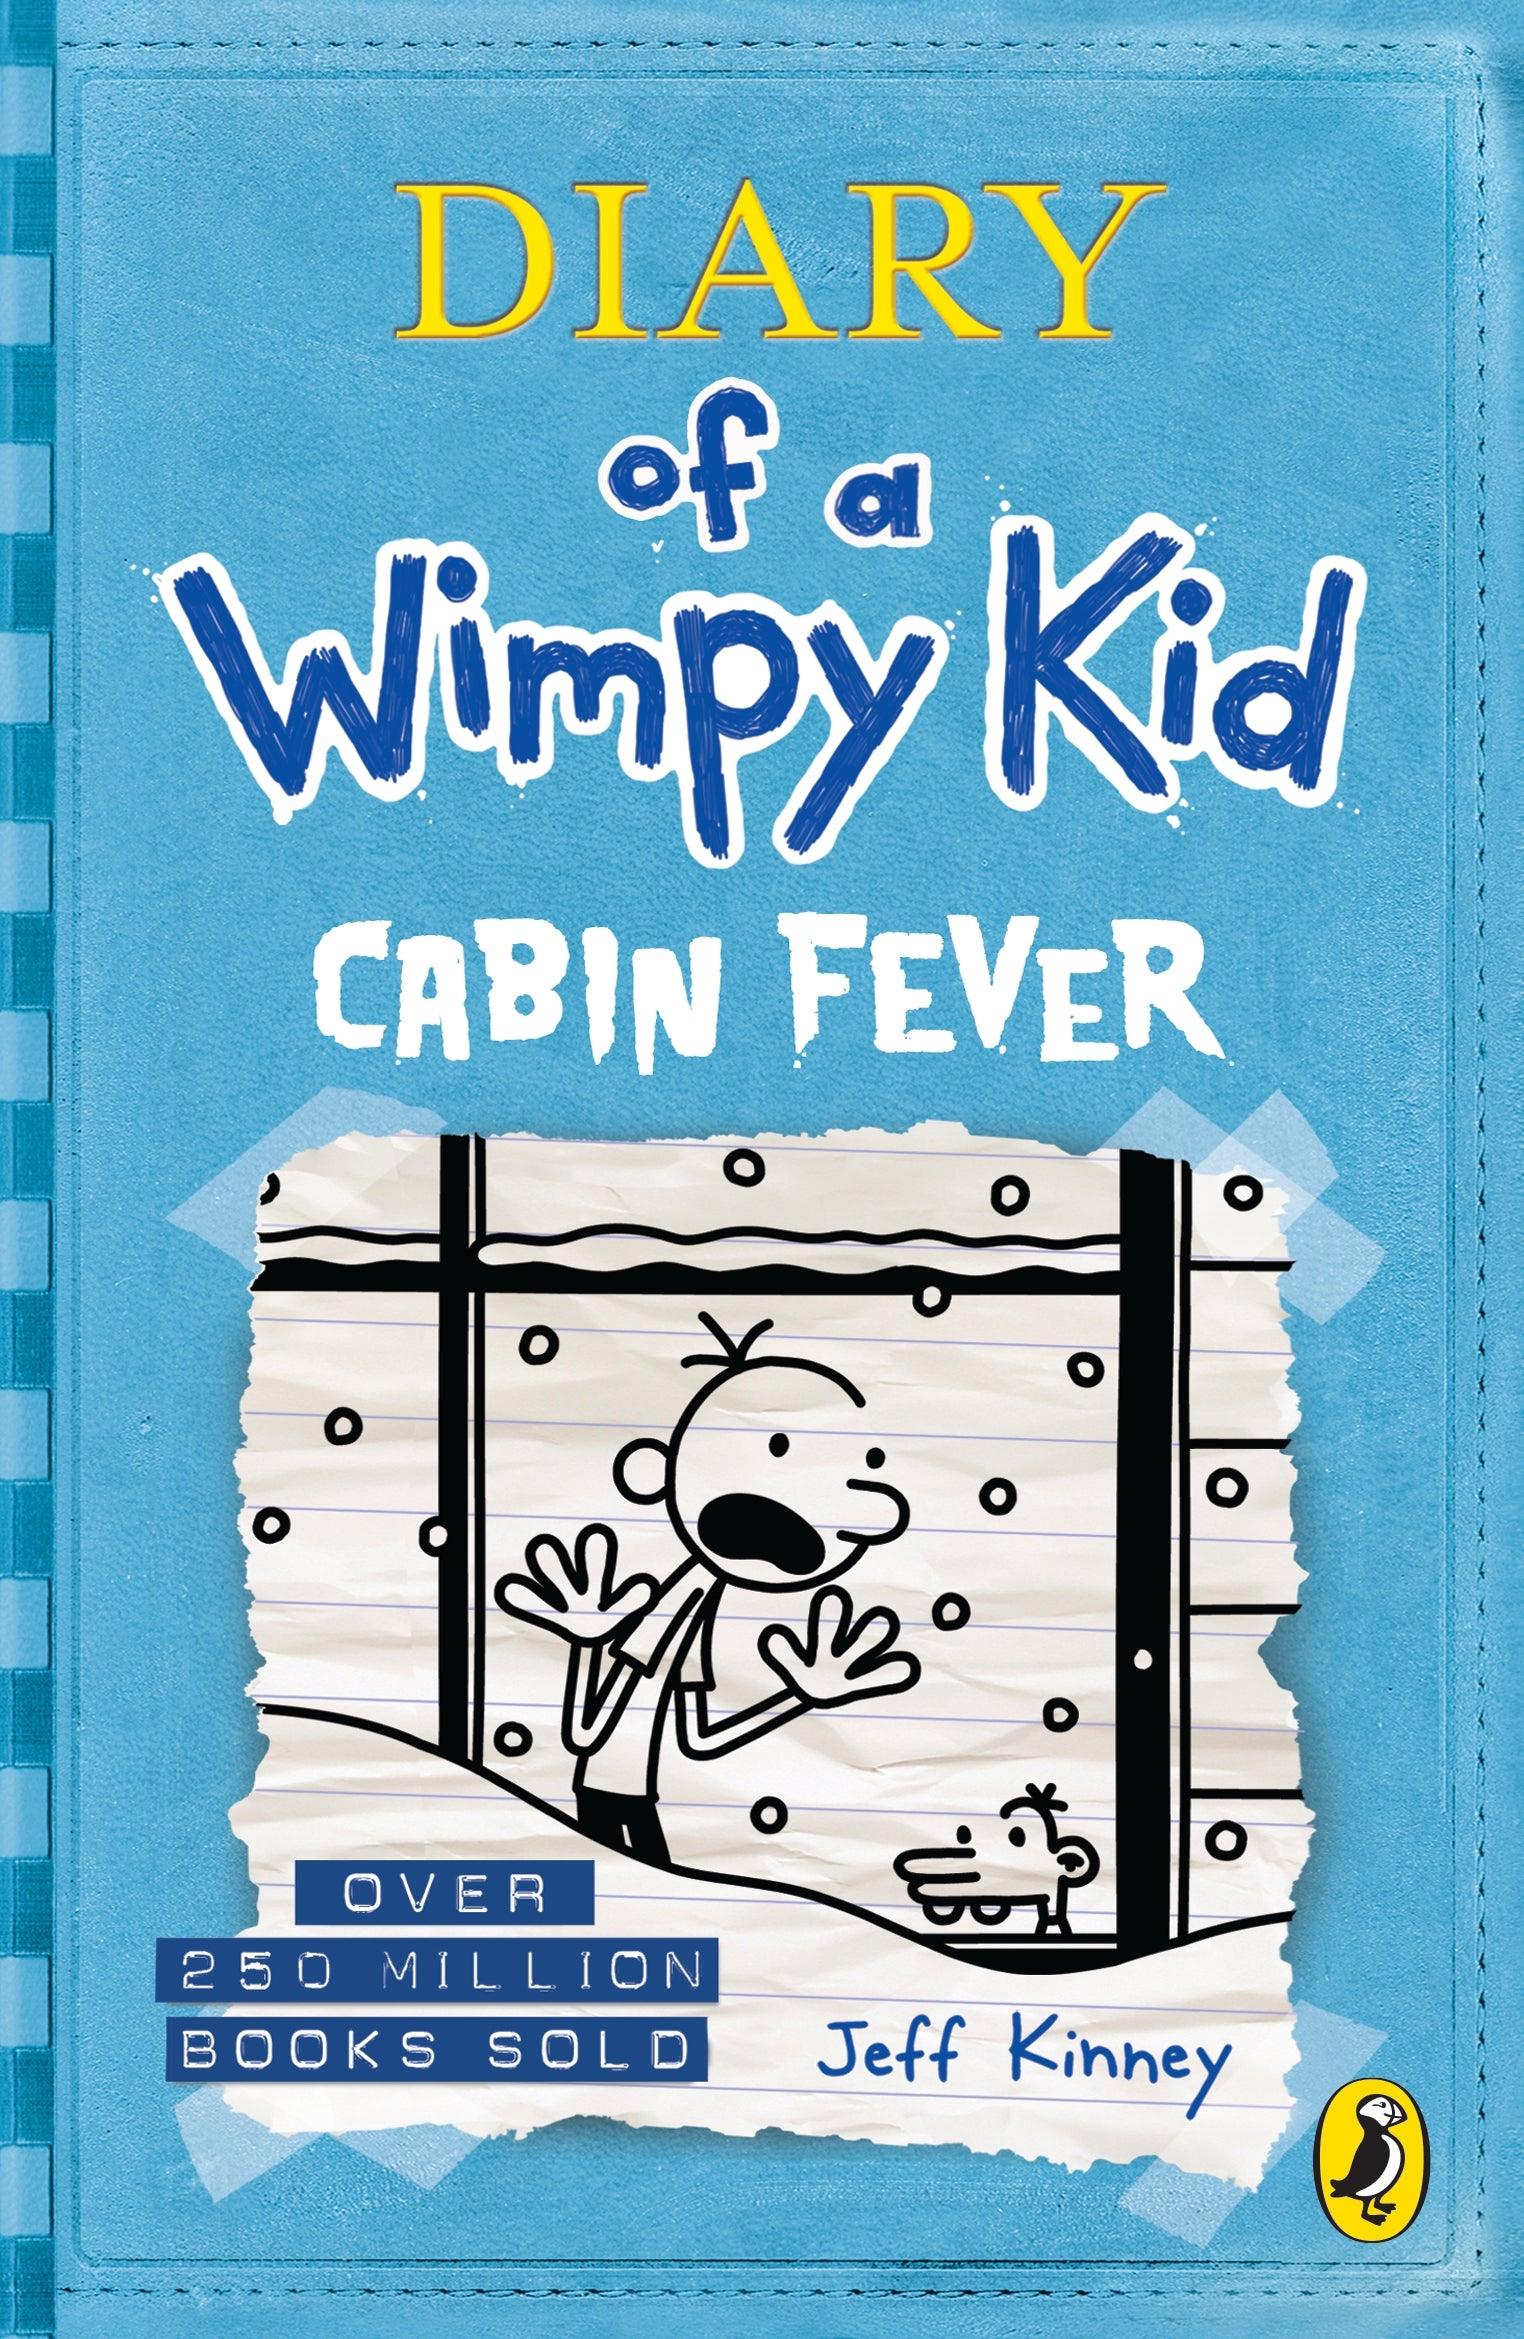 Diary of a Wimpy Kid #06 - CABIN FEVER - Spectrawide Bookstore